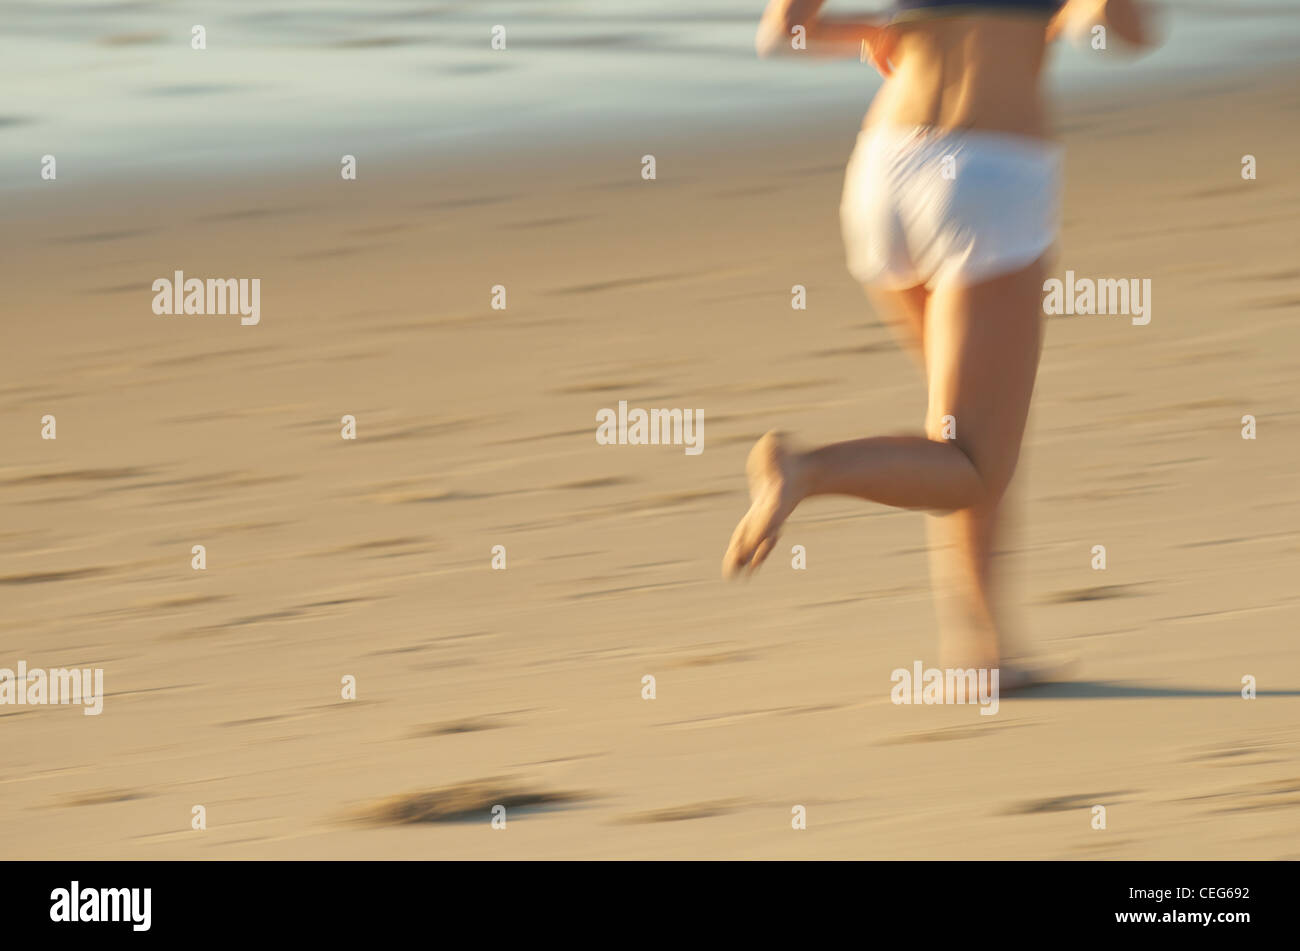 A woman running on the beach. Stock Photo